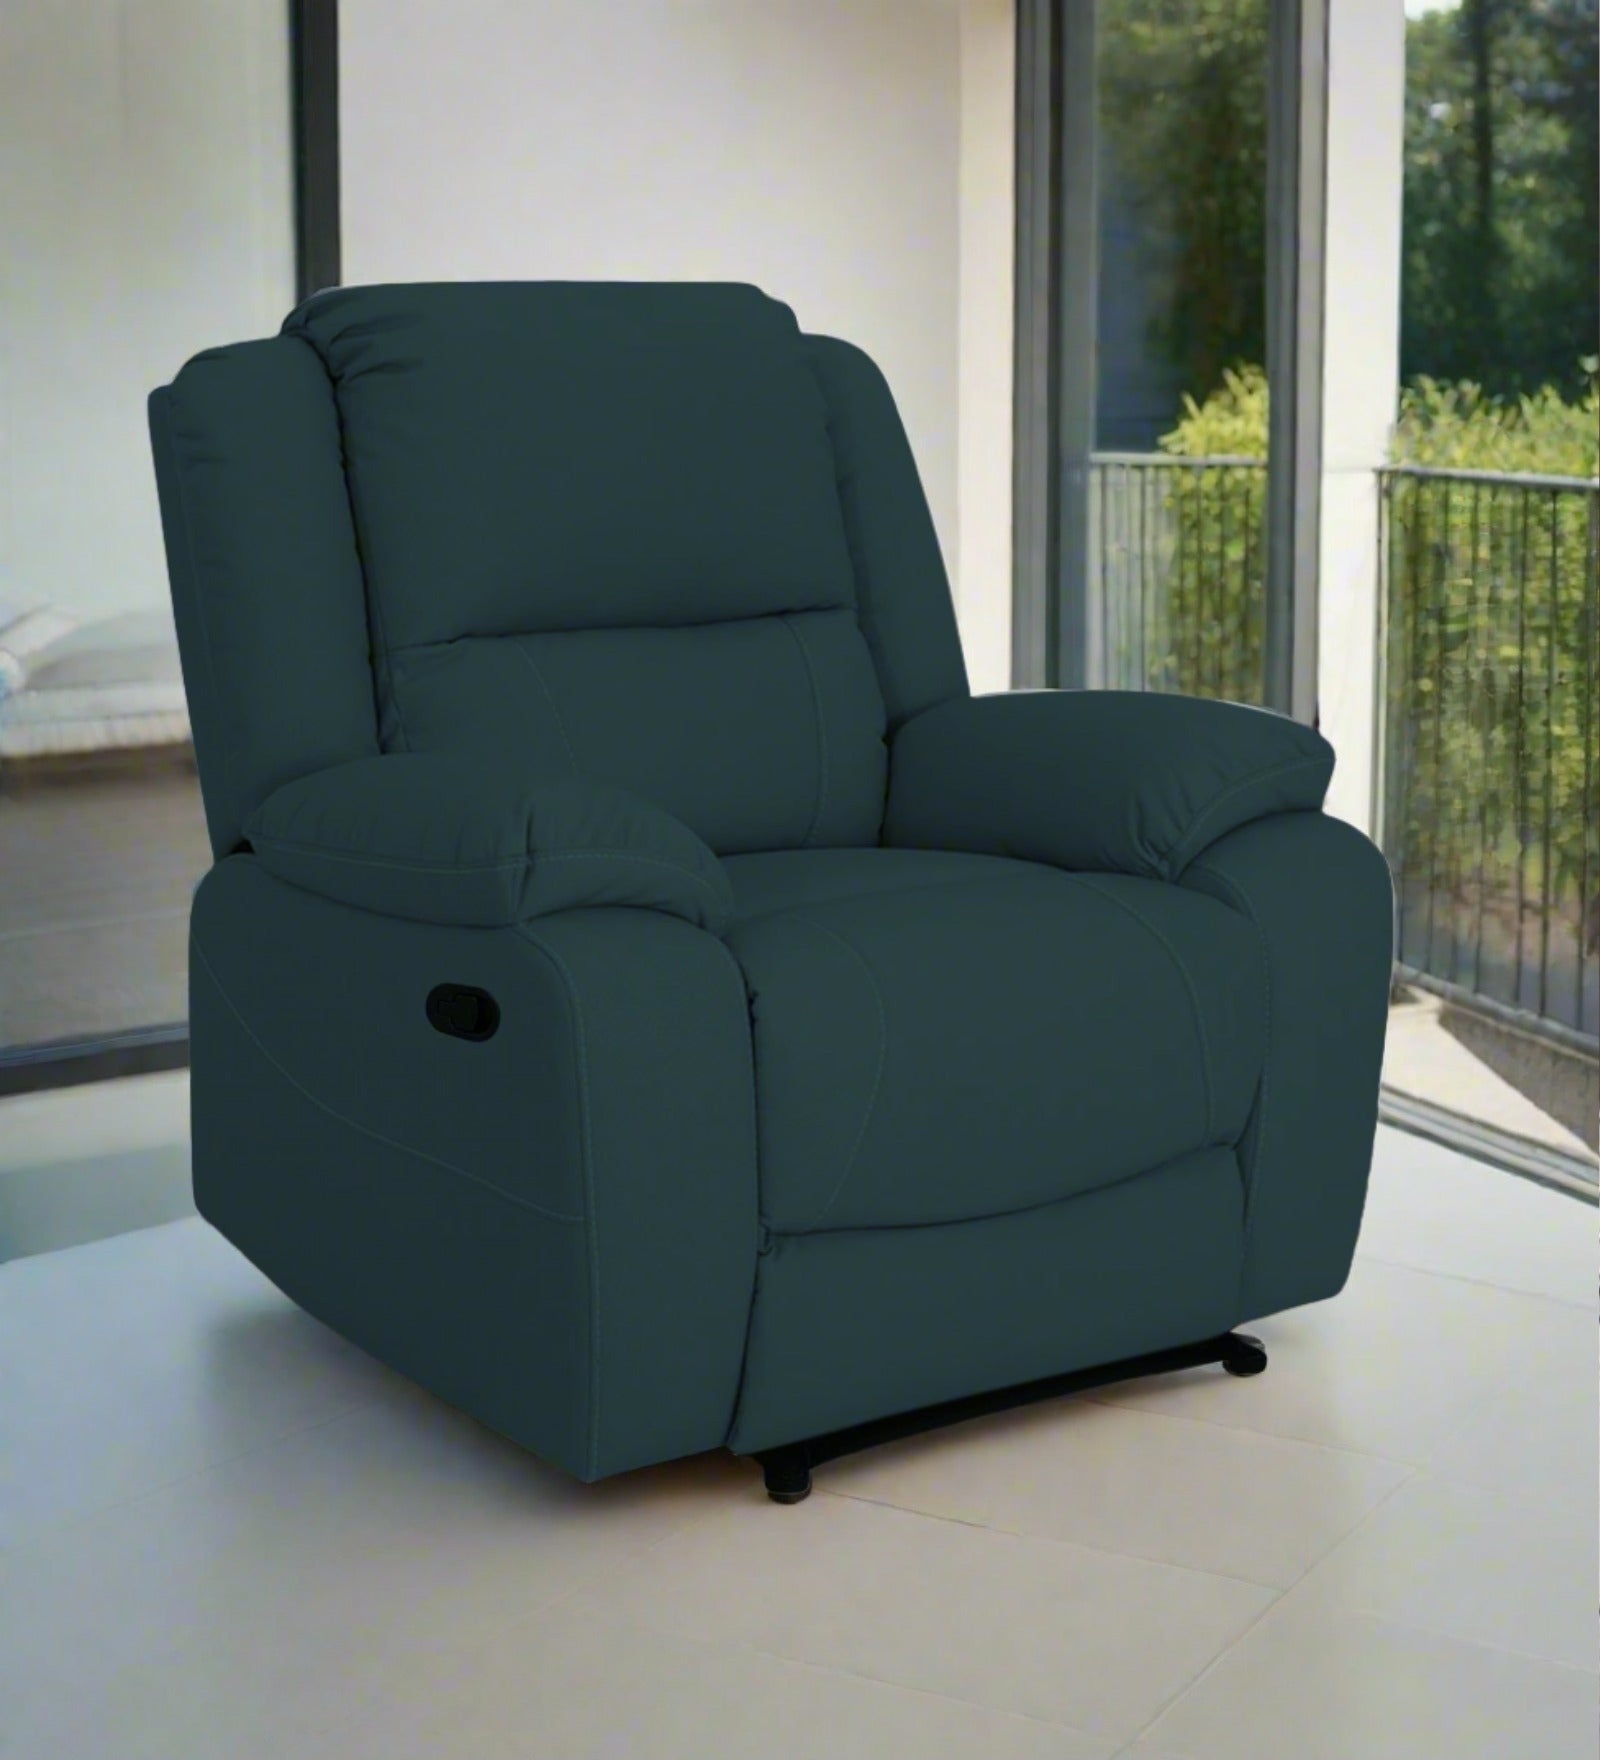 Adley Fabric Manual 1 Seater Recliner In Harbour Blue Colour